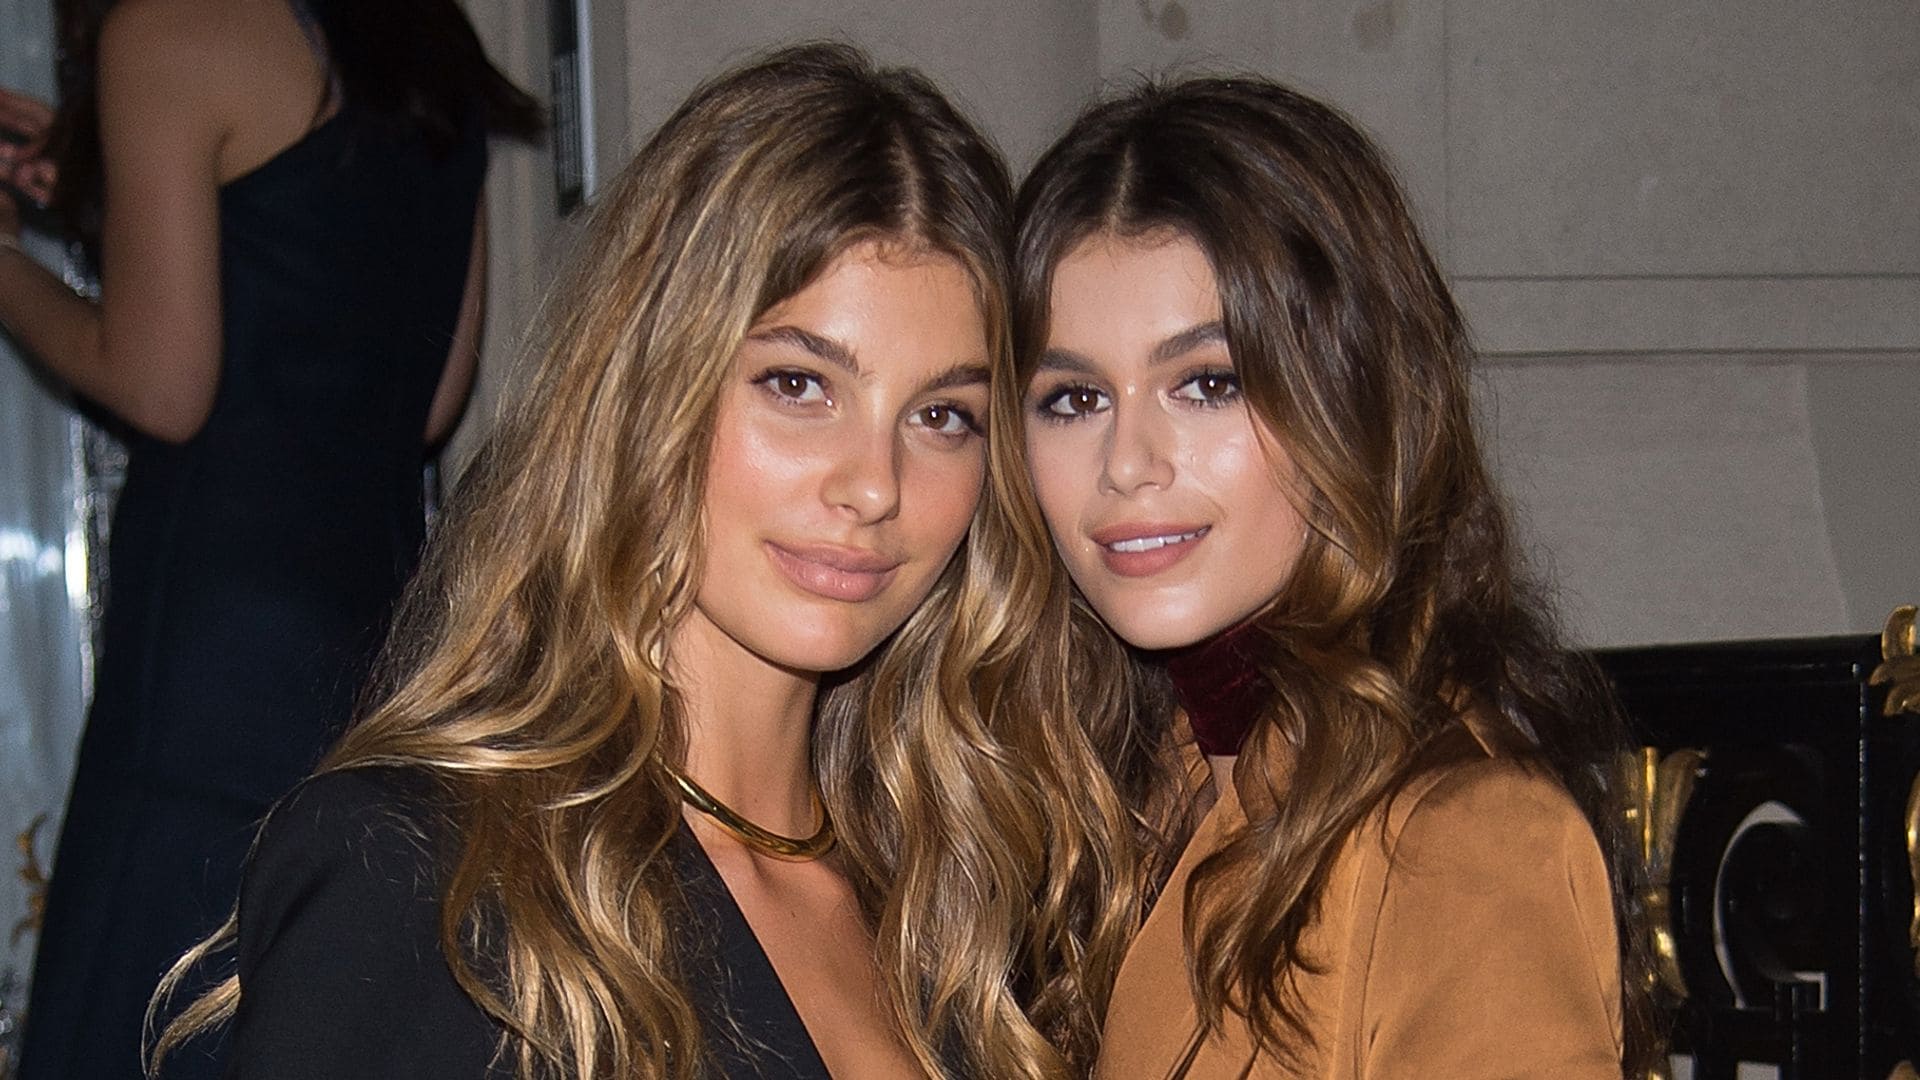 Camila Morrone goes on a double date with Kaia Gerber and Austin Butler